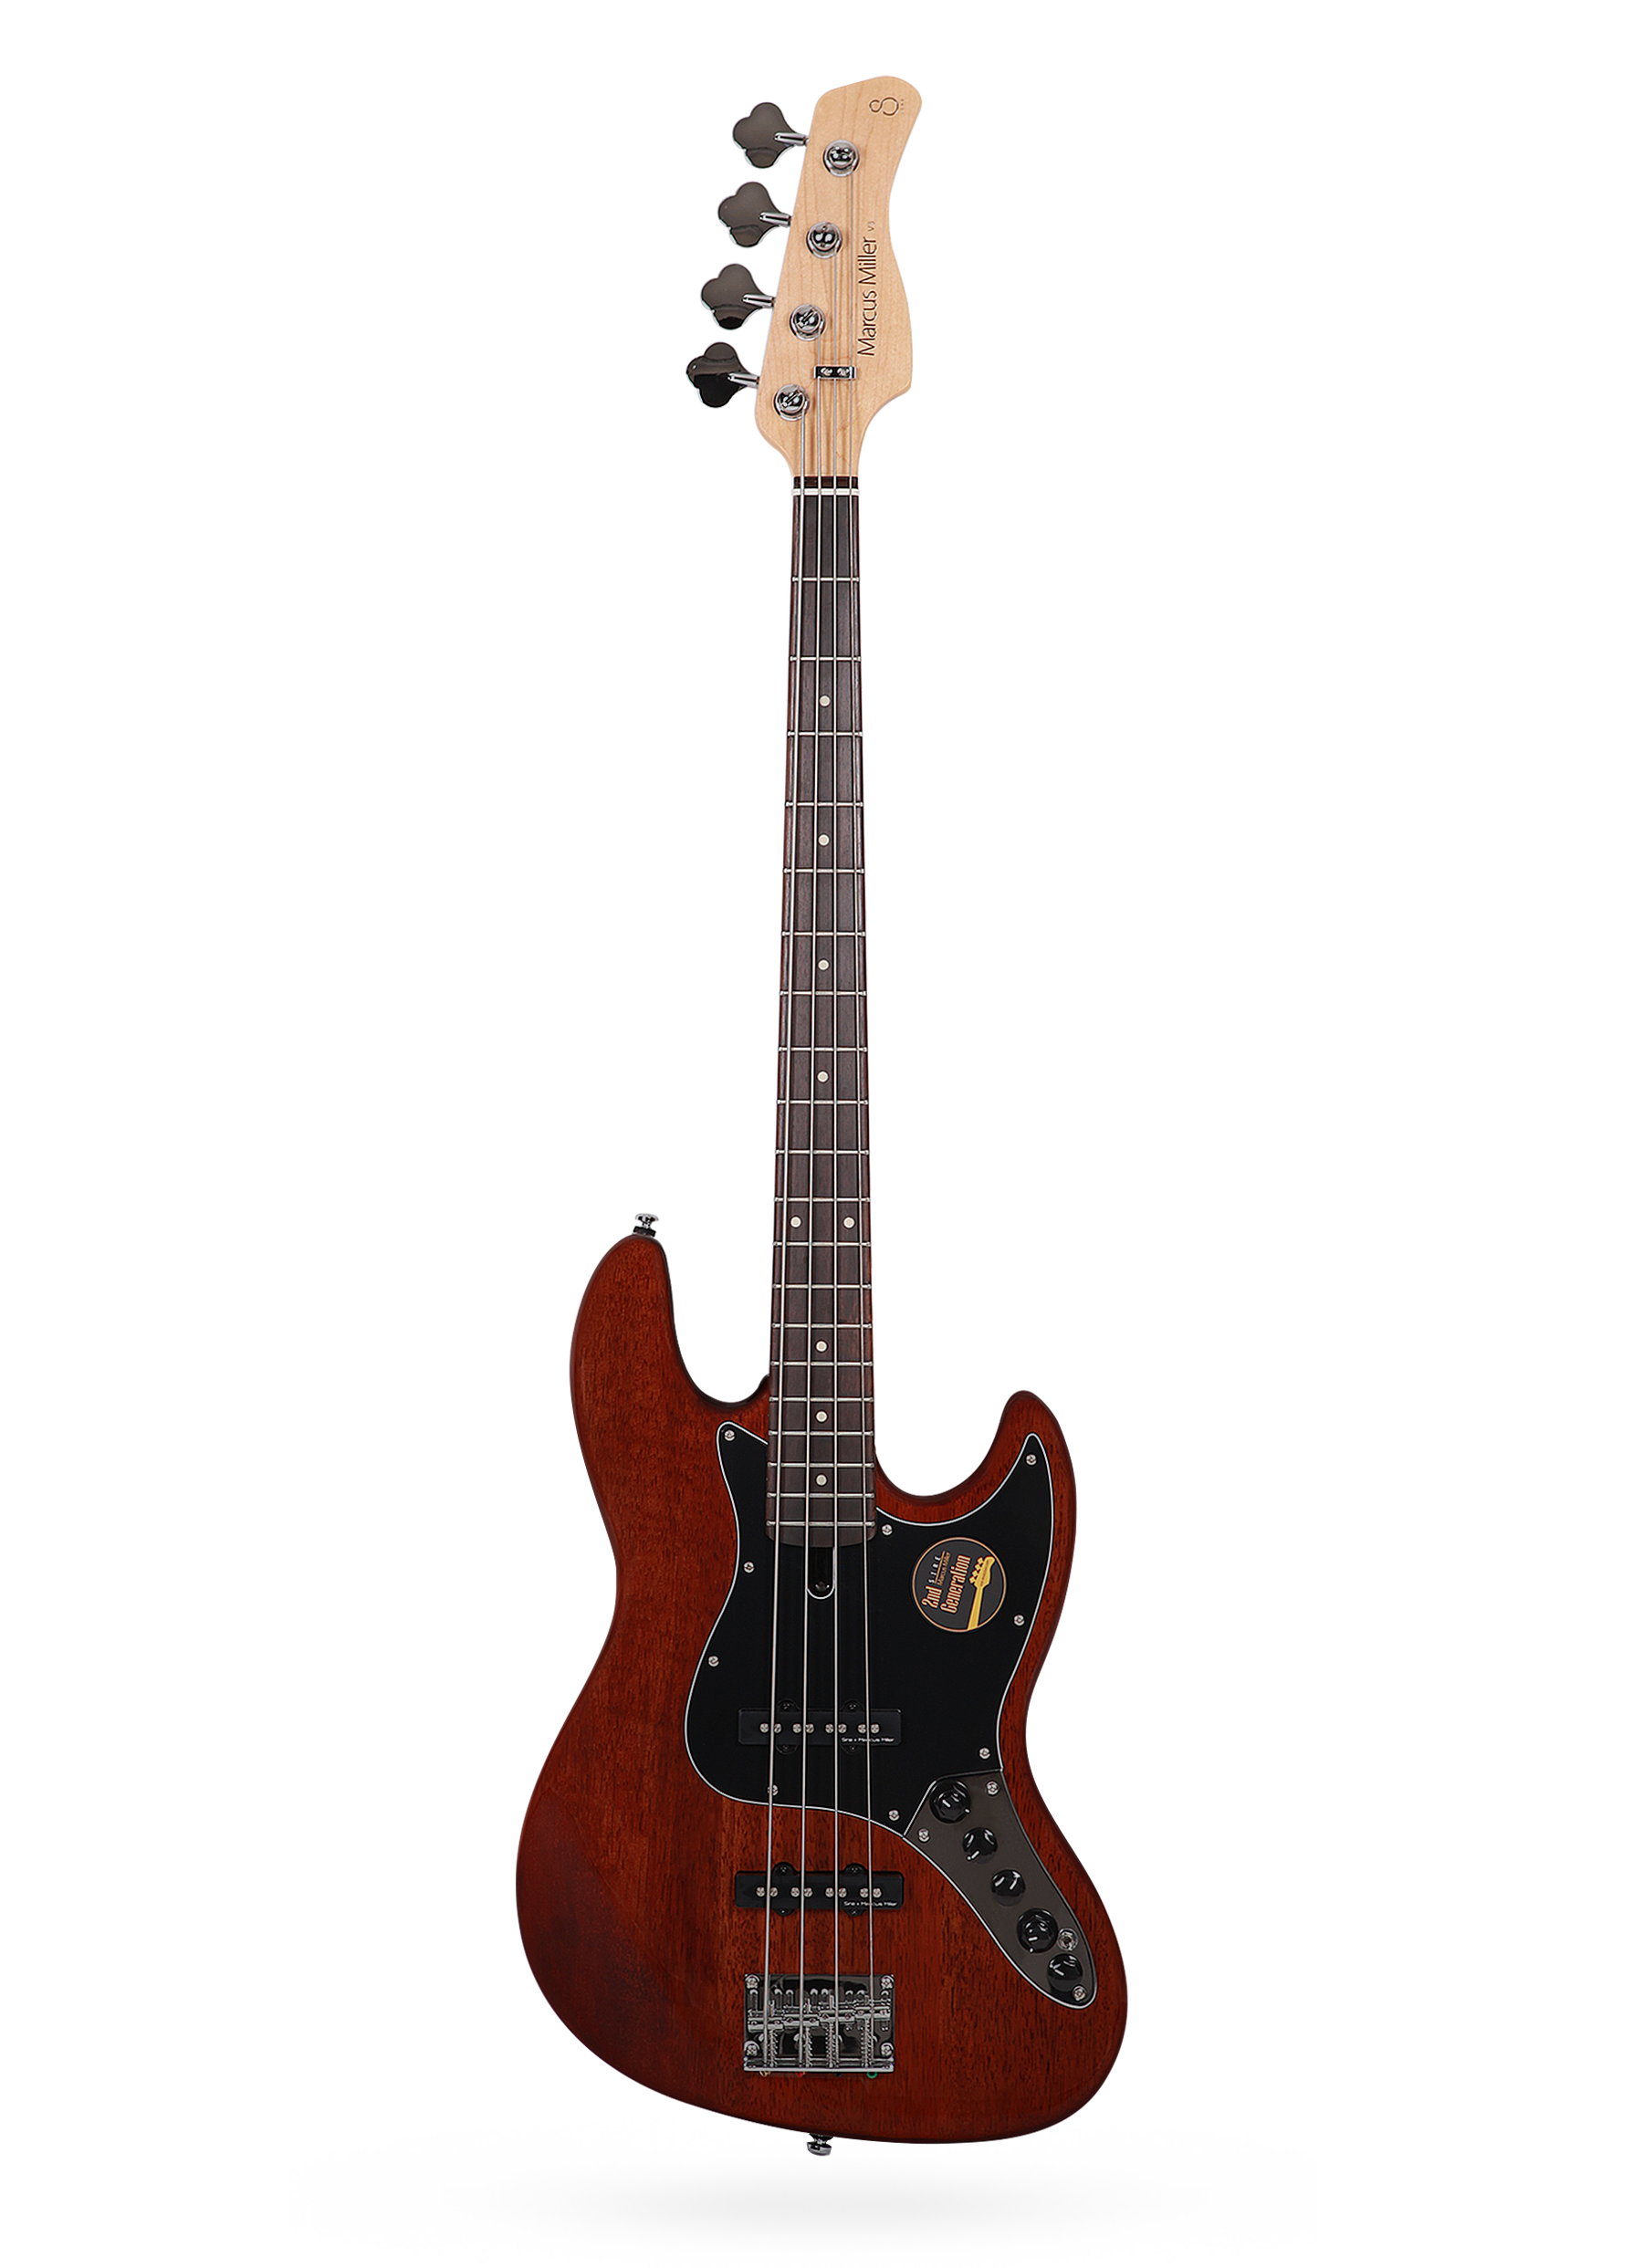 Sire Marcus Miller V3 2nd Generation - Sire USA